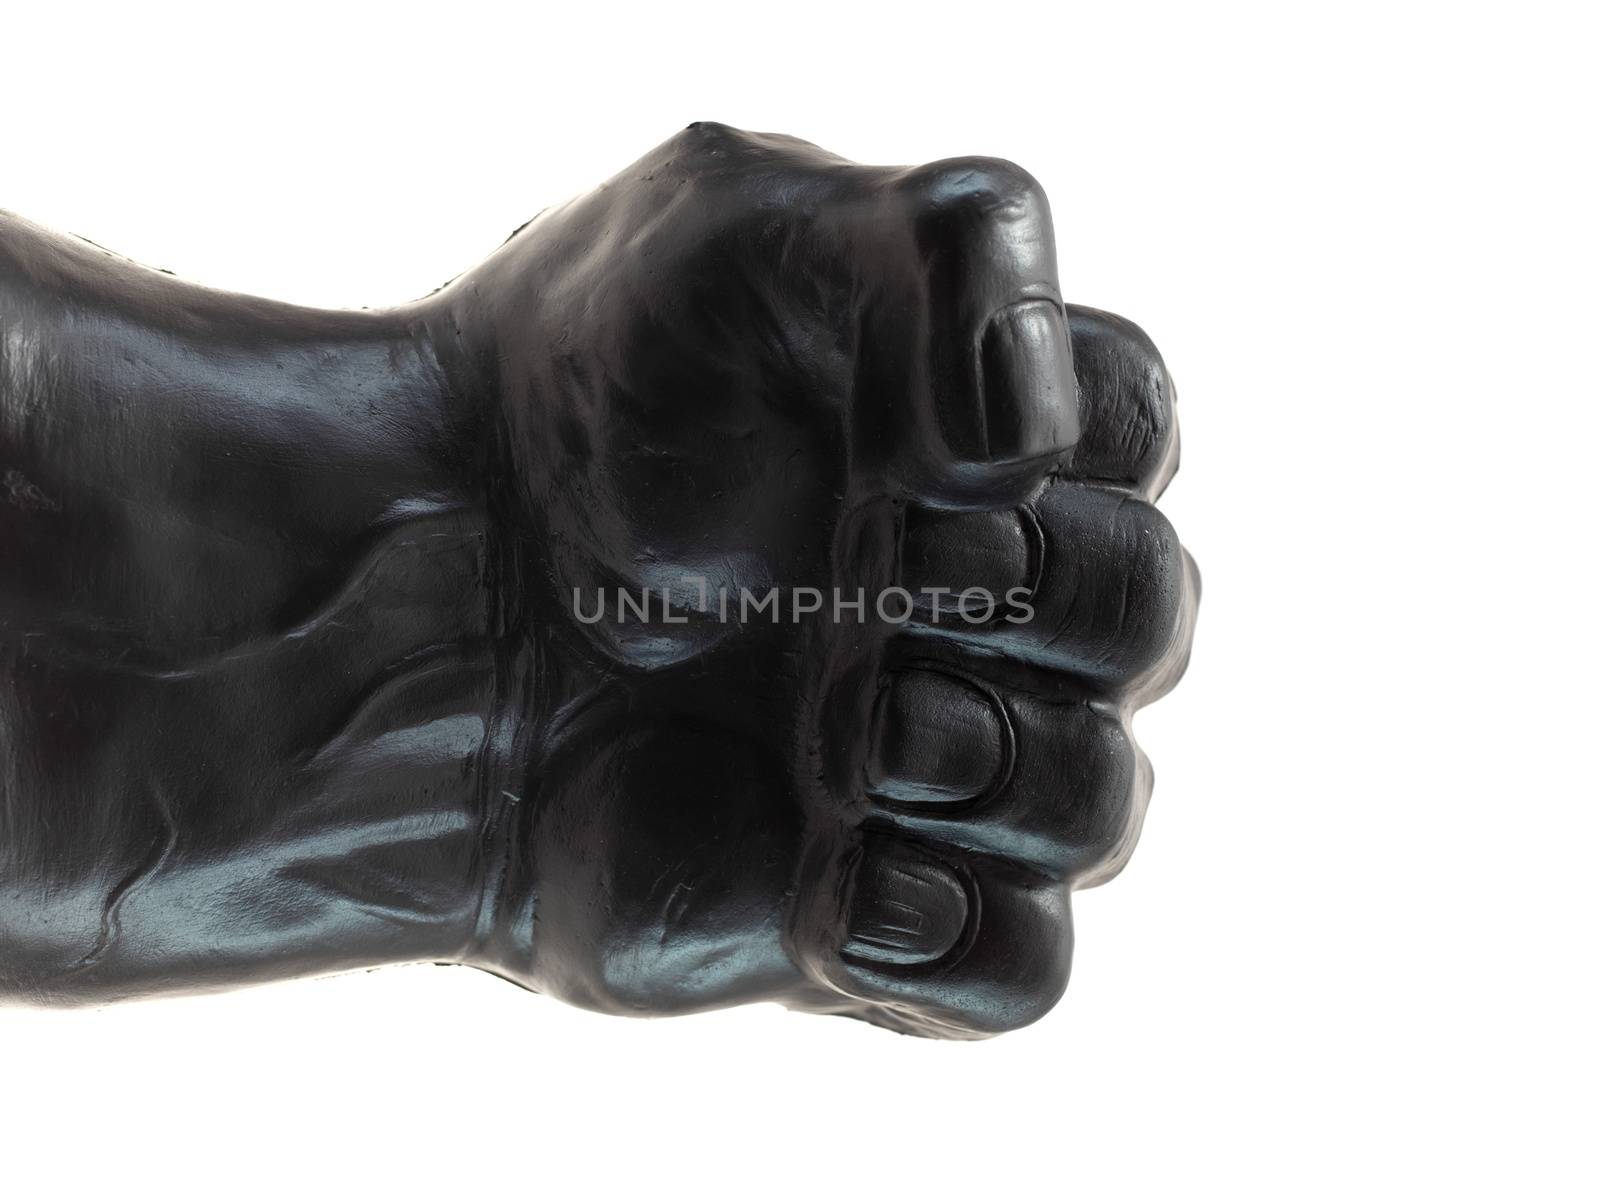 A clenched fist isolated against a white background